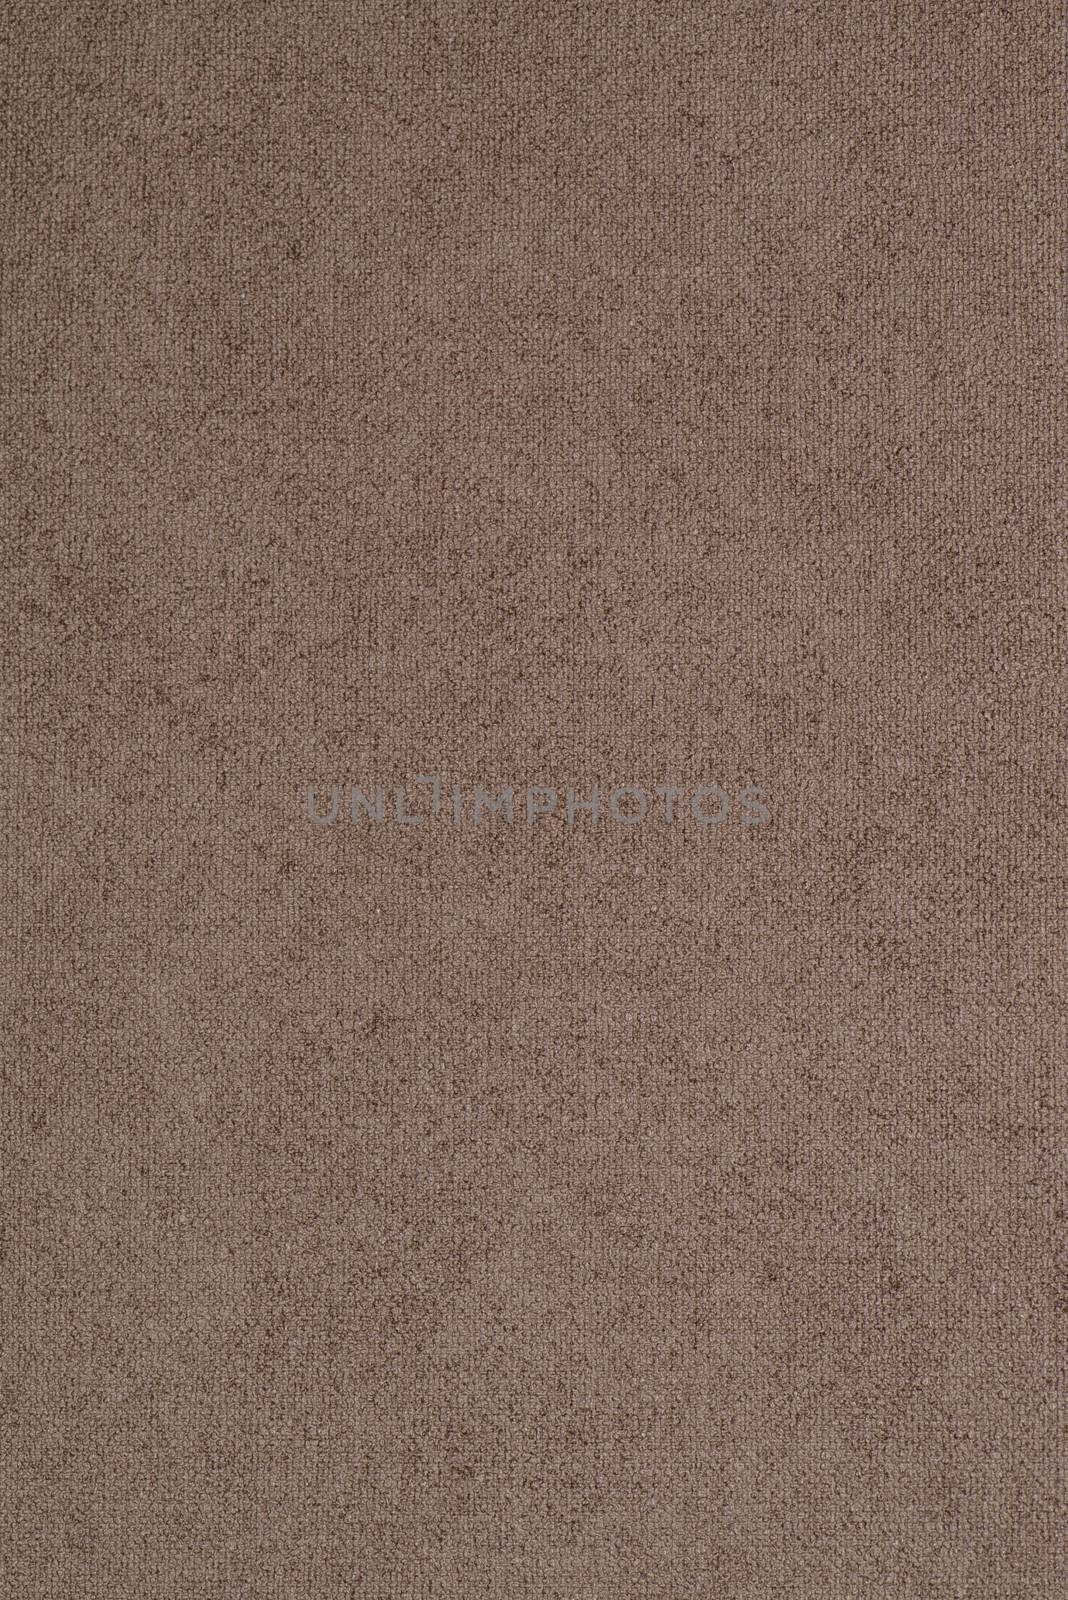 Brown wallpaper embossed texture for background.